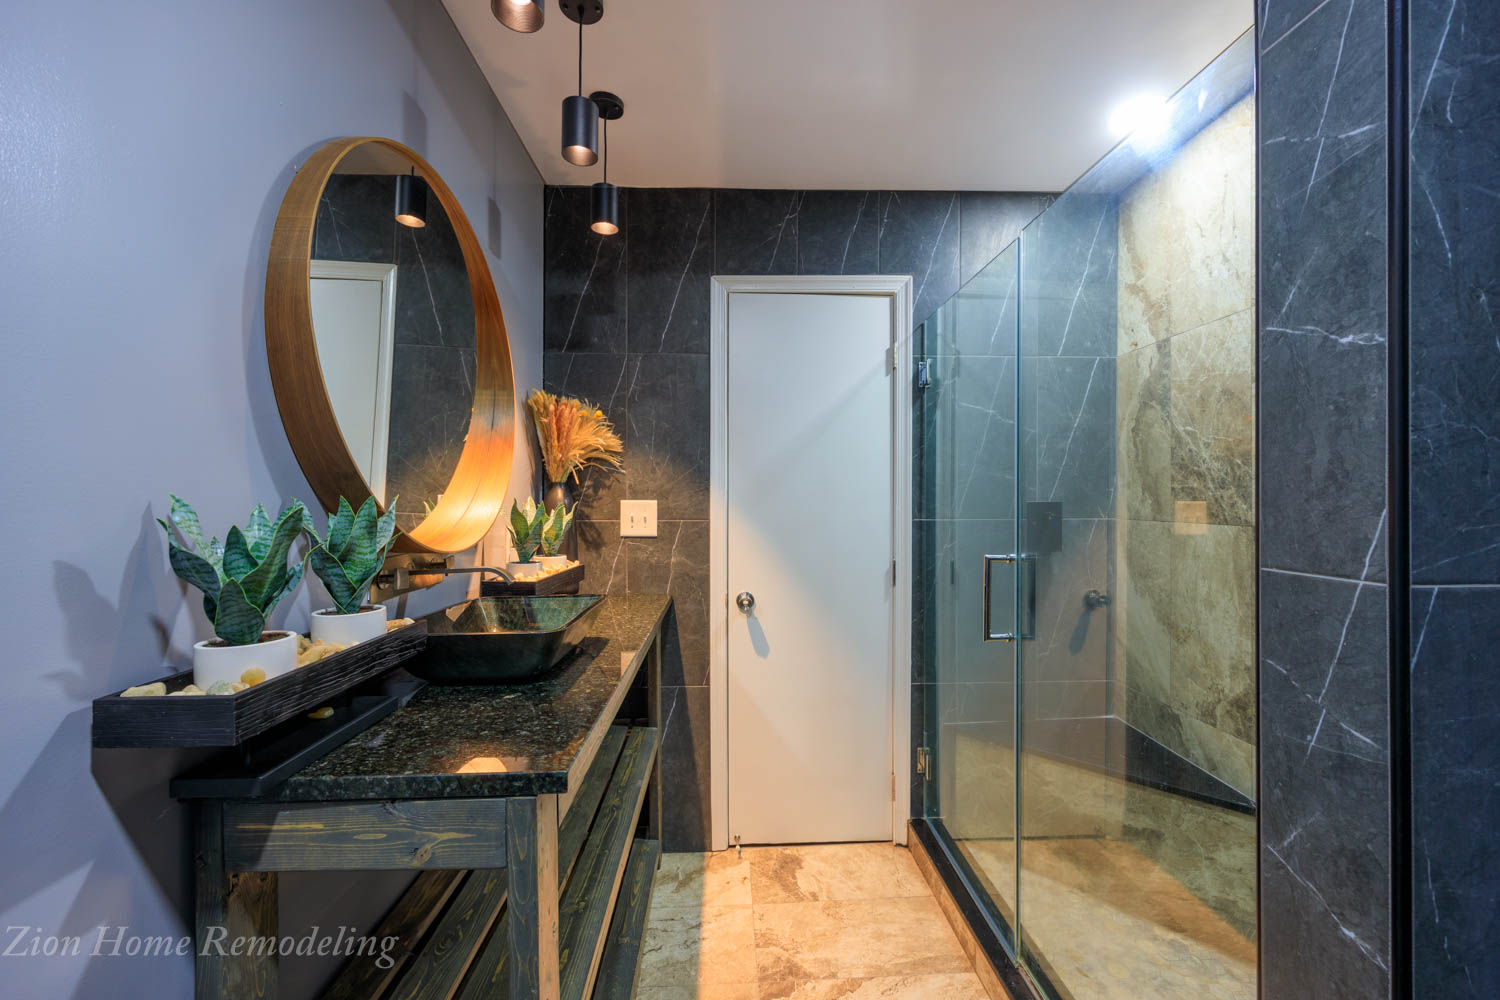 Spa-inspired bathroom in Bowie, MD, featuring black marble walls, accent wall with textured tiles, angle corner bench in the shower, round mirror, pendant light, custom vanity with granite top, and wall-mounted faucet.